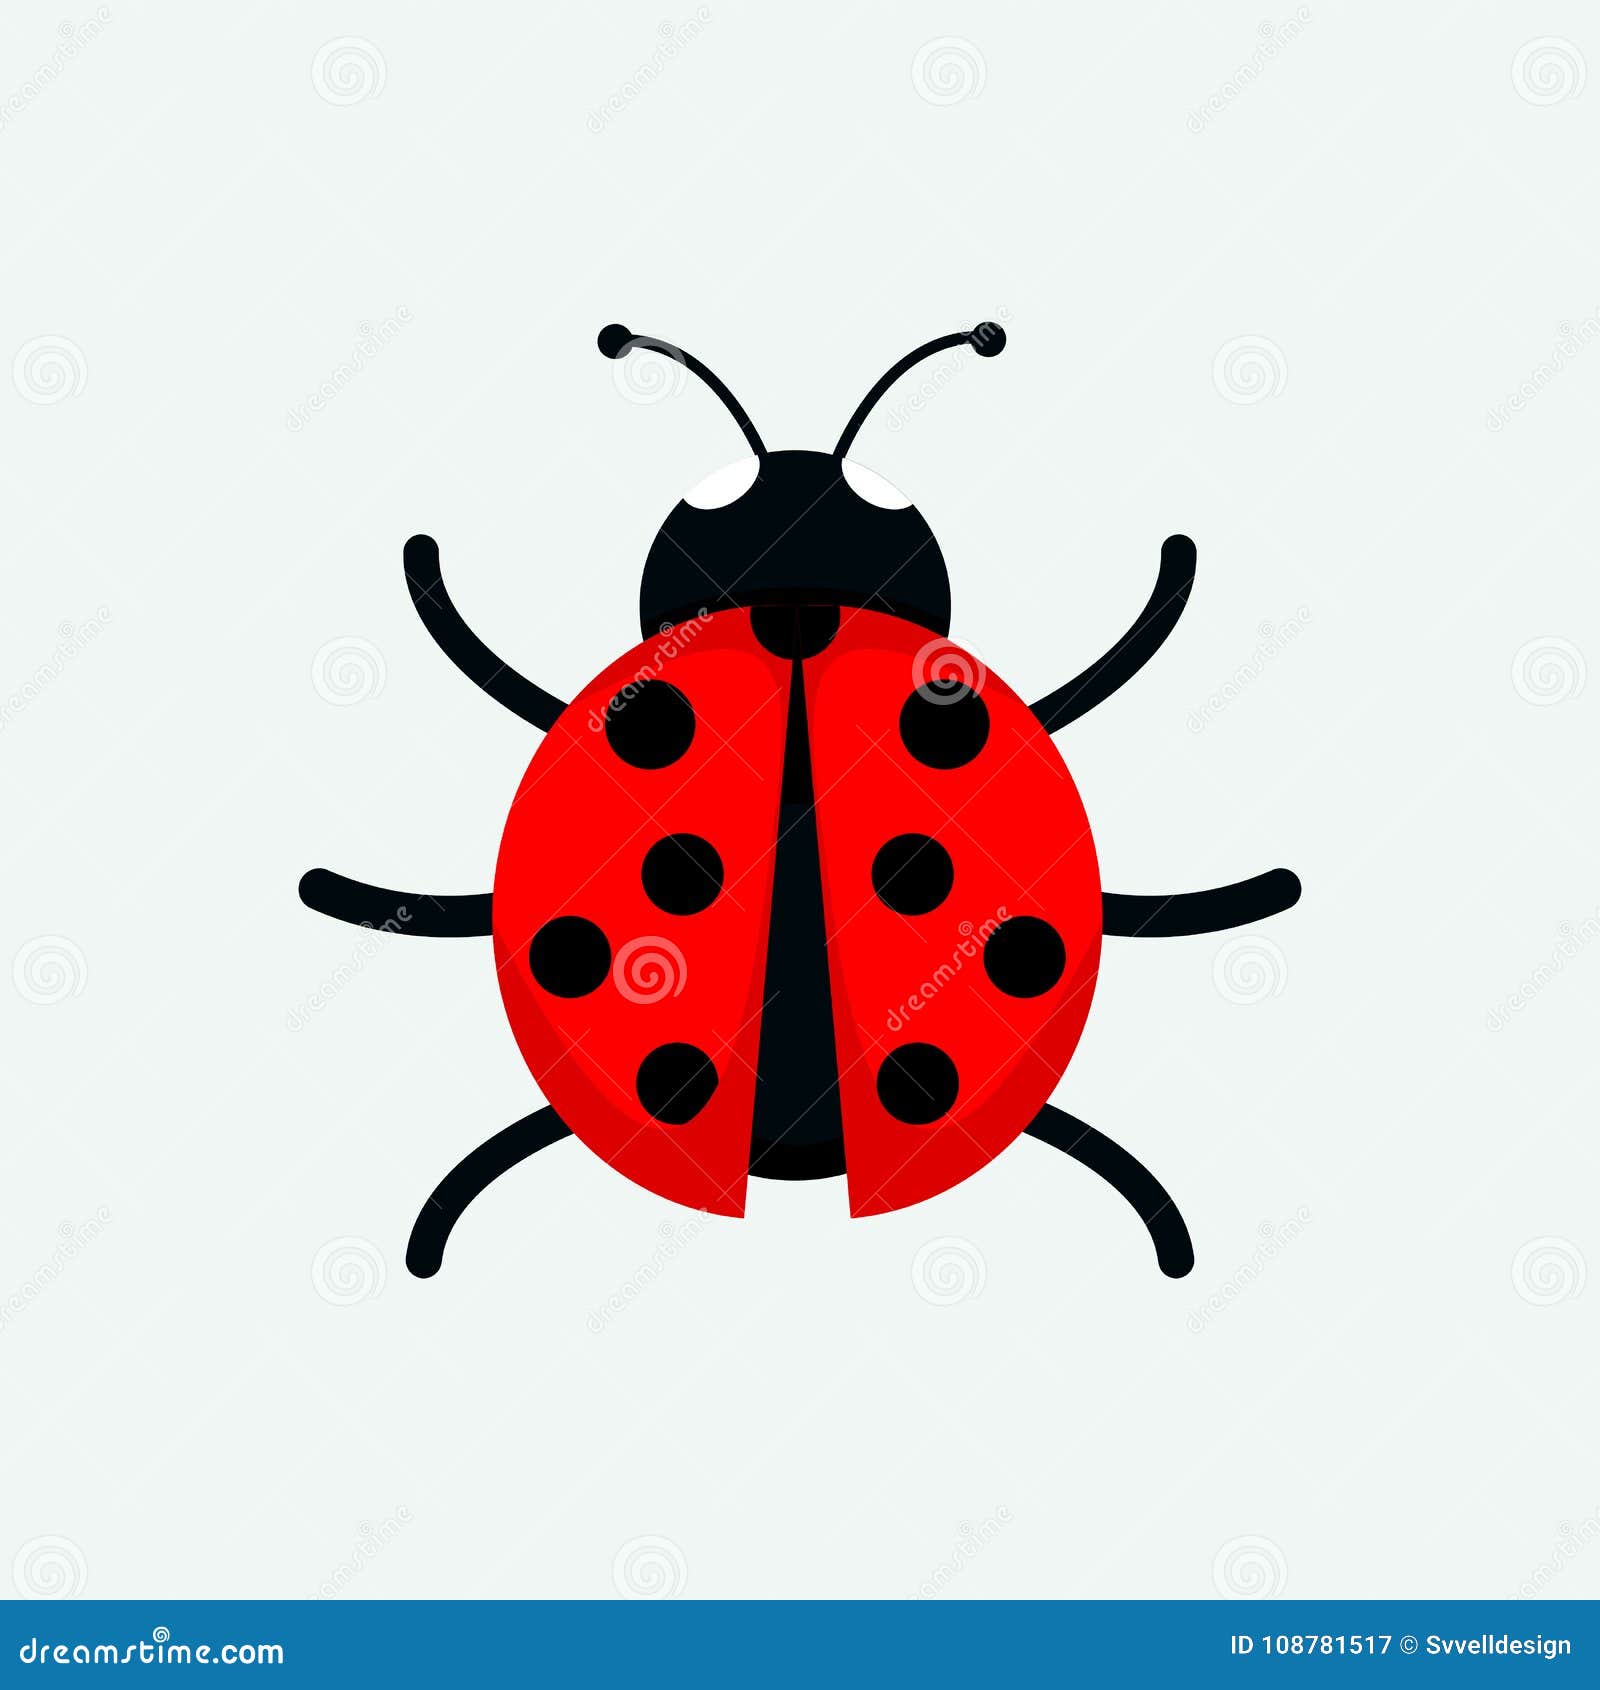 How to Draw a Ladybug for Kids - How to Draw Easy